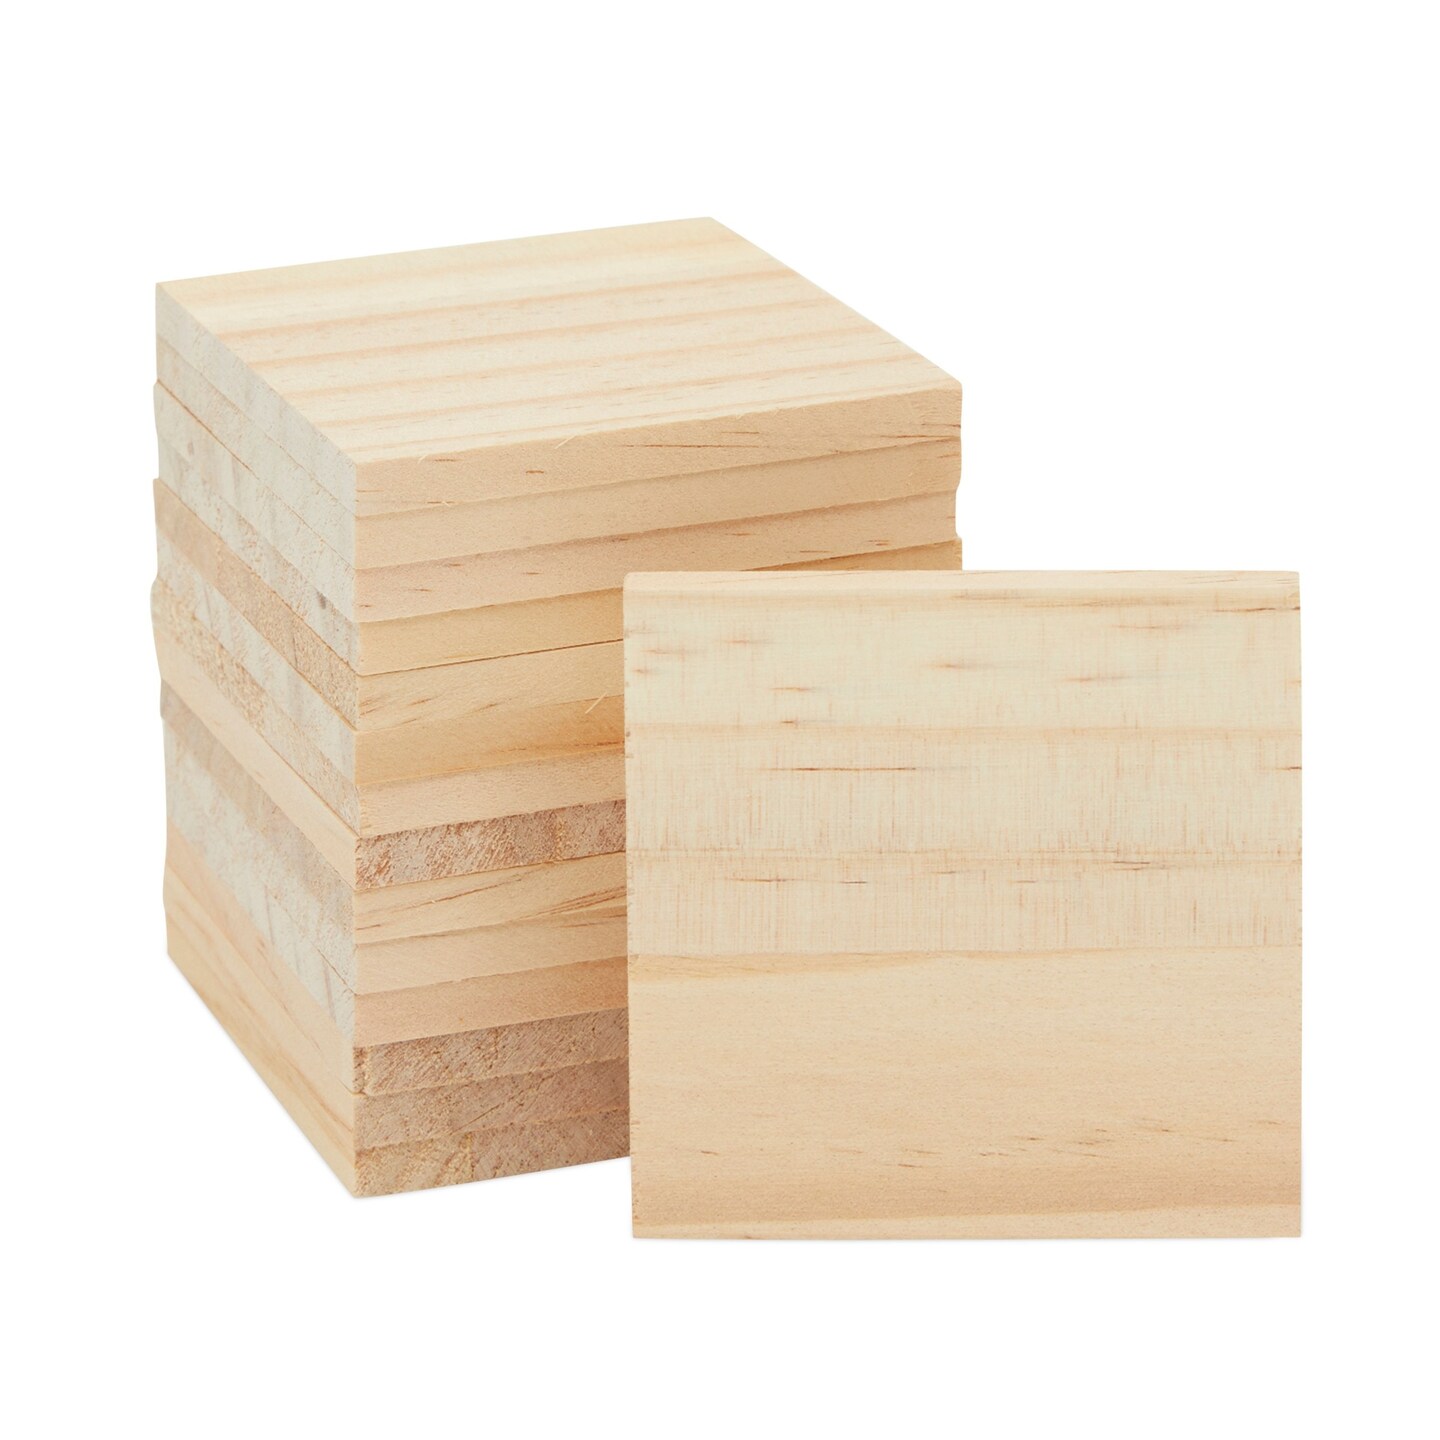 DIY Wood Block Puzzle, 1-3/4 inch Wood Cubes in Wood Tray, 4 or 9 Pieces | Woodpeckers | 9 Cubes | Michaels